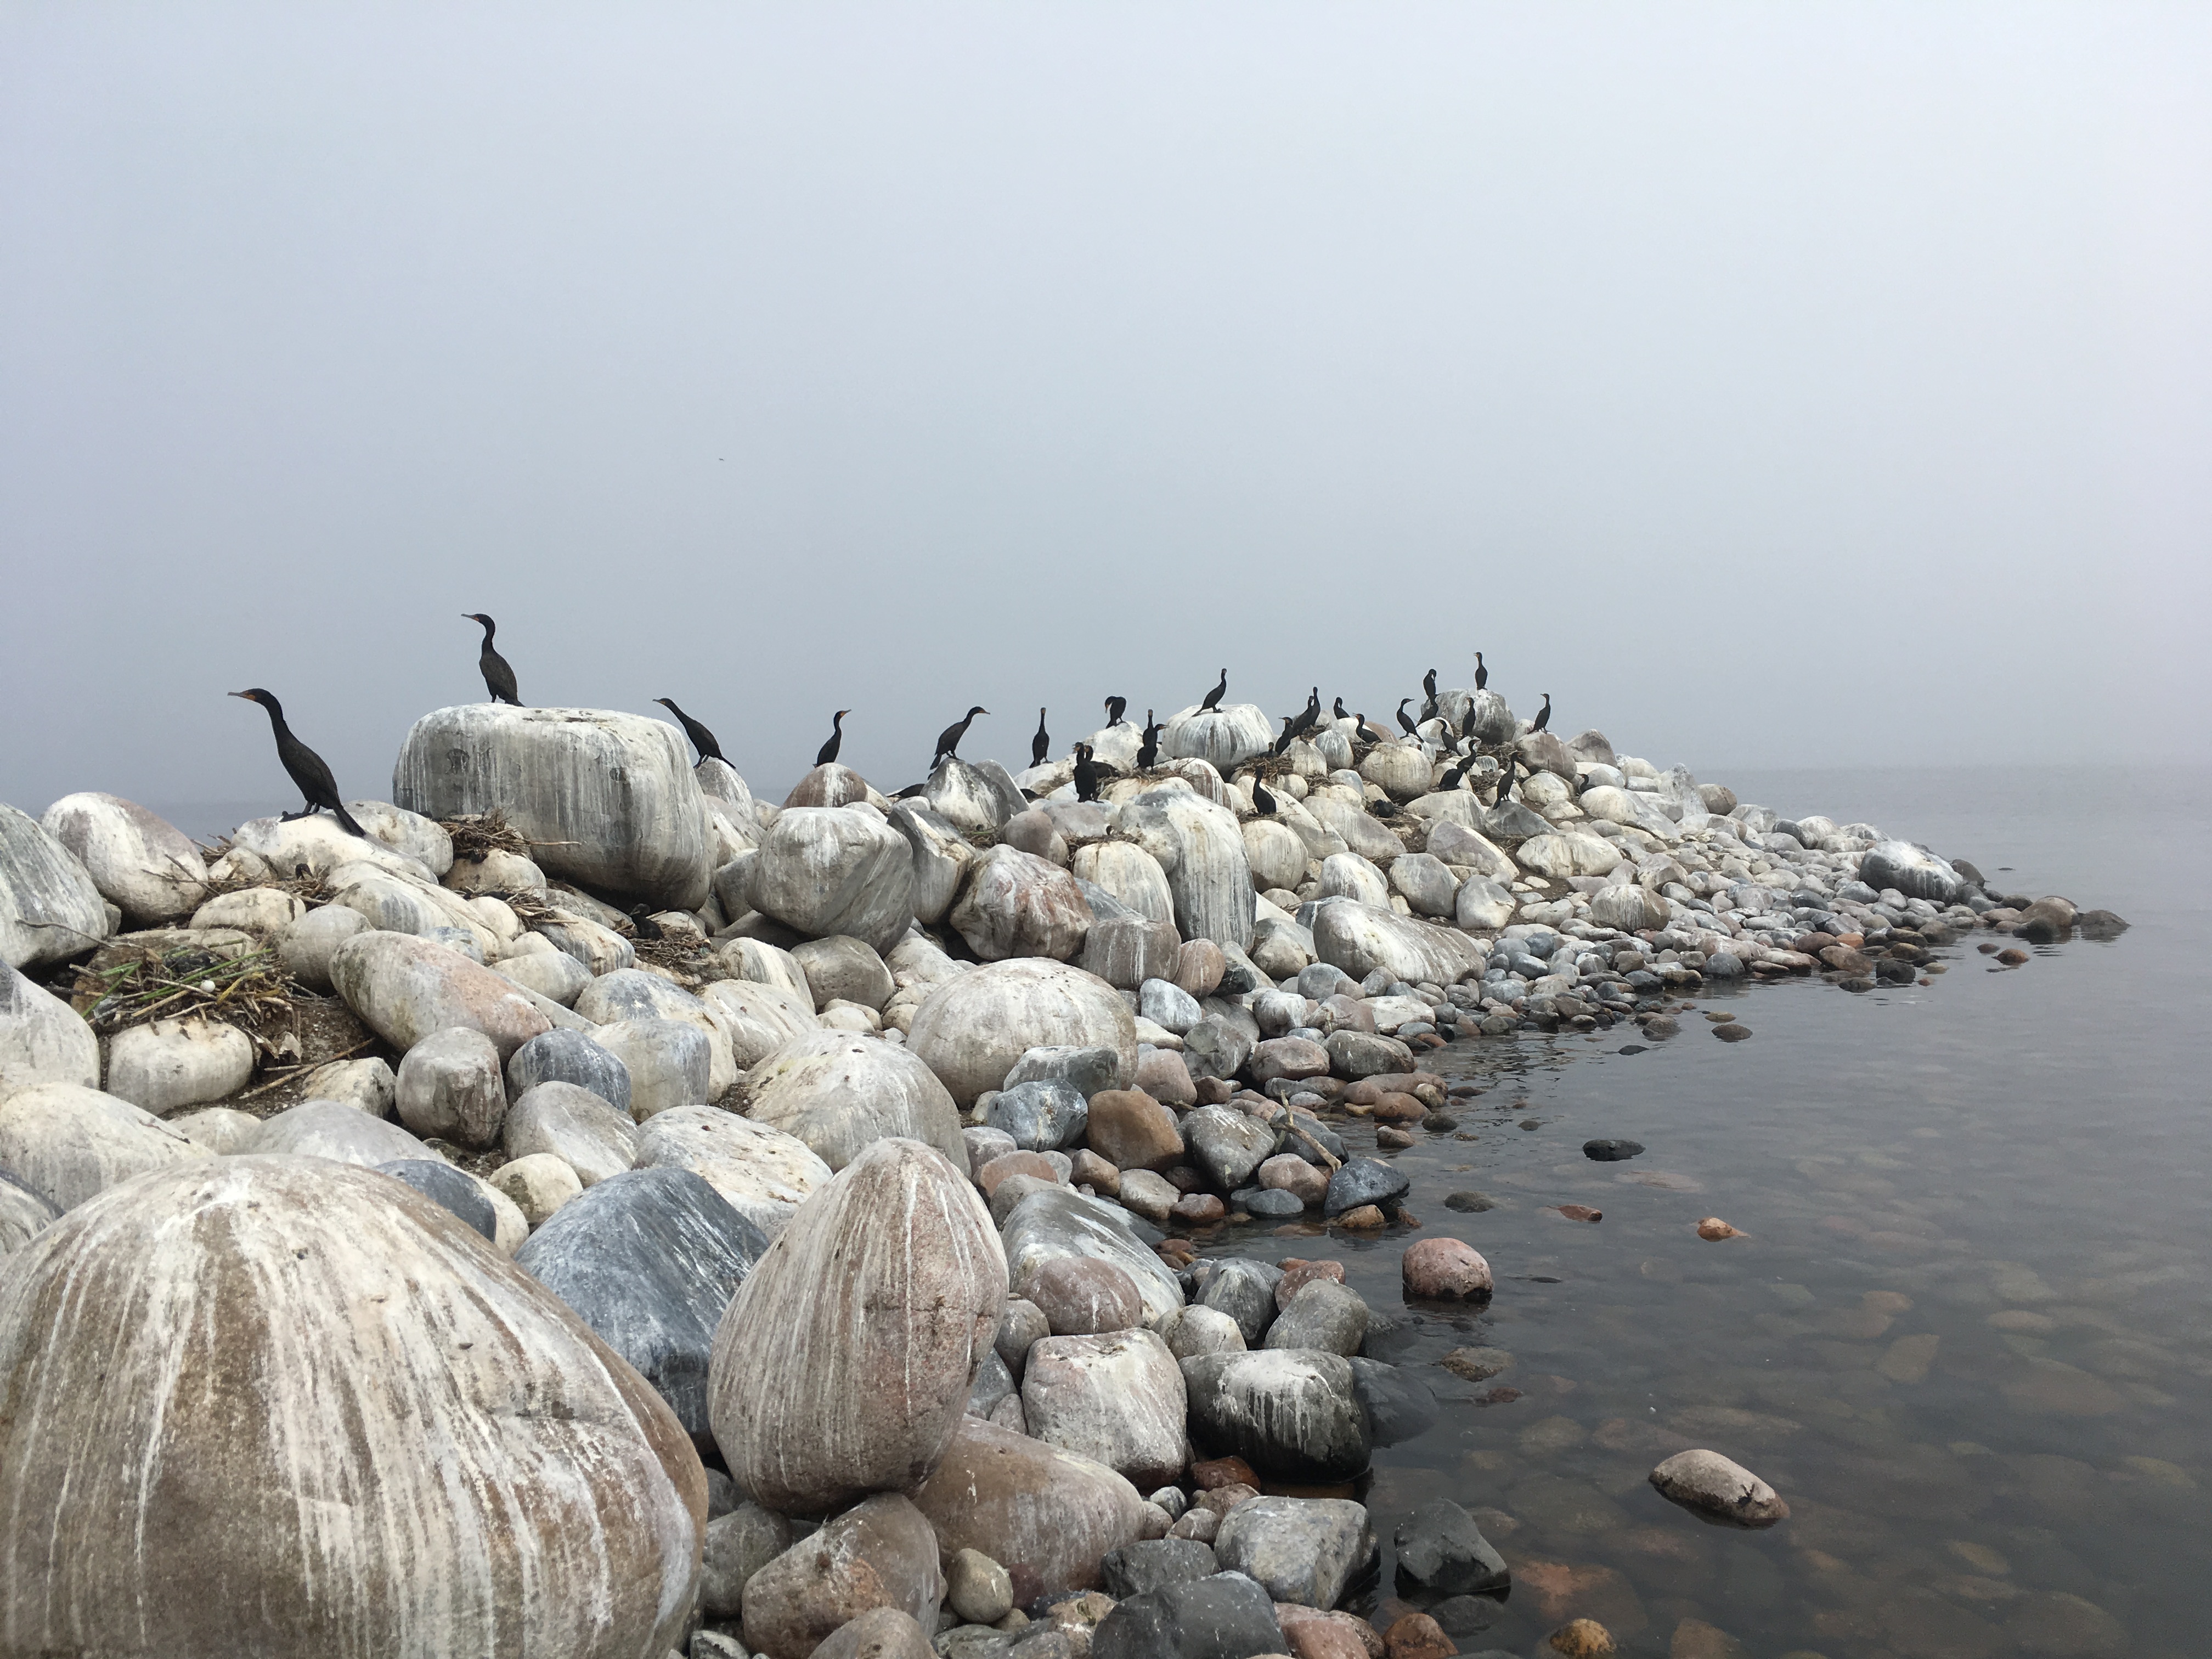 The rocky island dominates the photo, with large boulders in the bottom left corner and the island curving to the right. The large rocks are streaked with bird guano, cormorants are perched throughout and the calm water of the lake surrounds it on this foggy day.